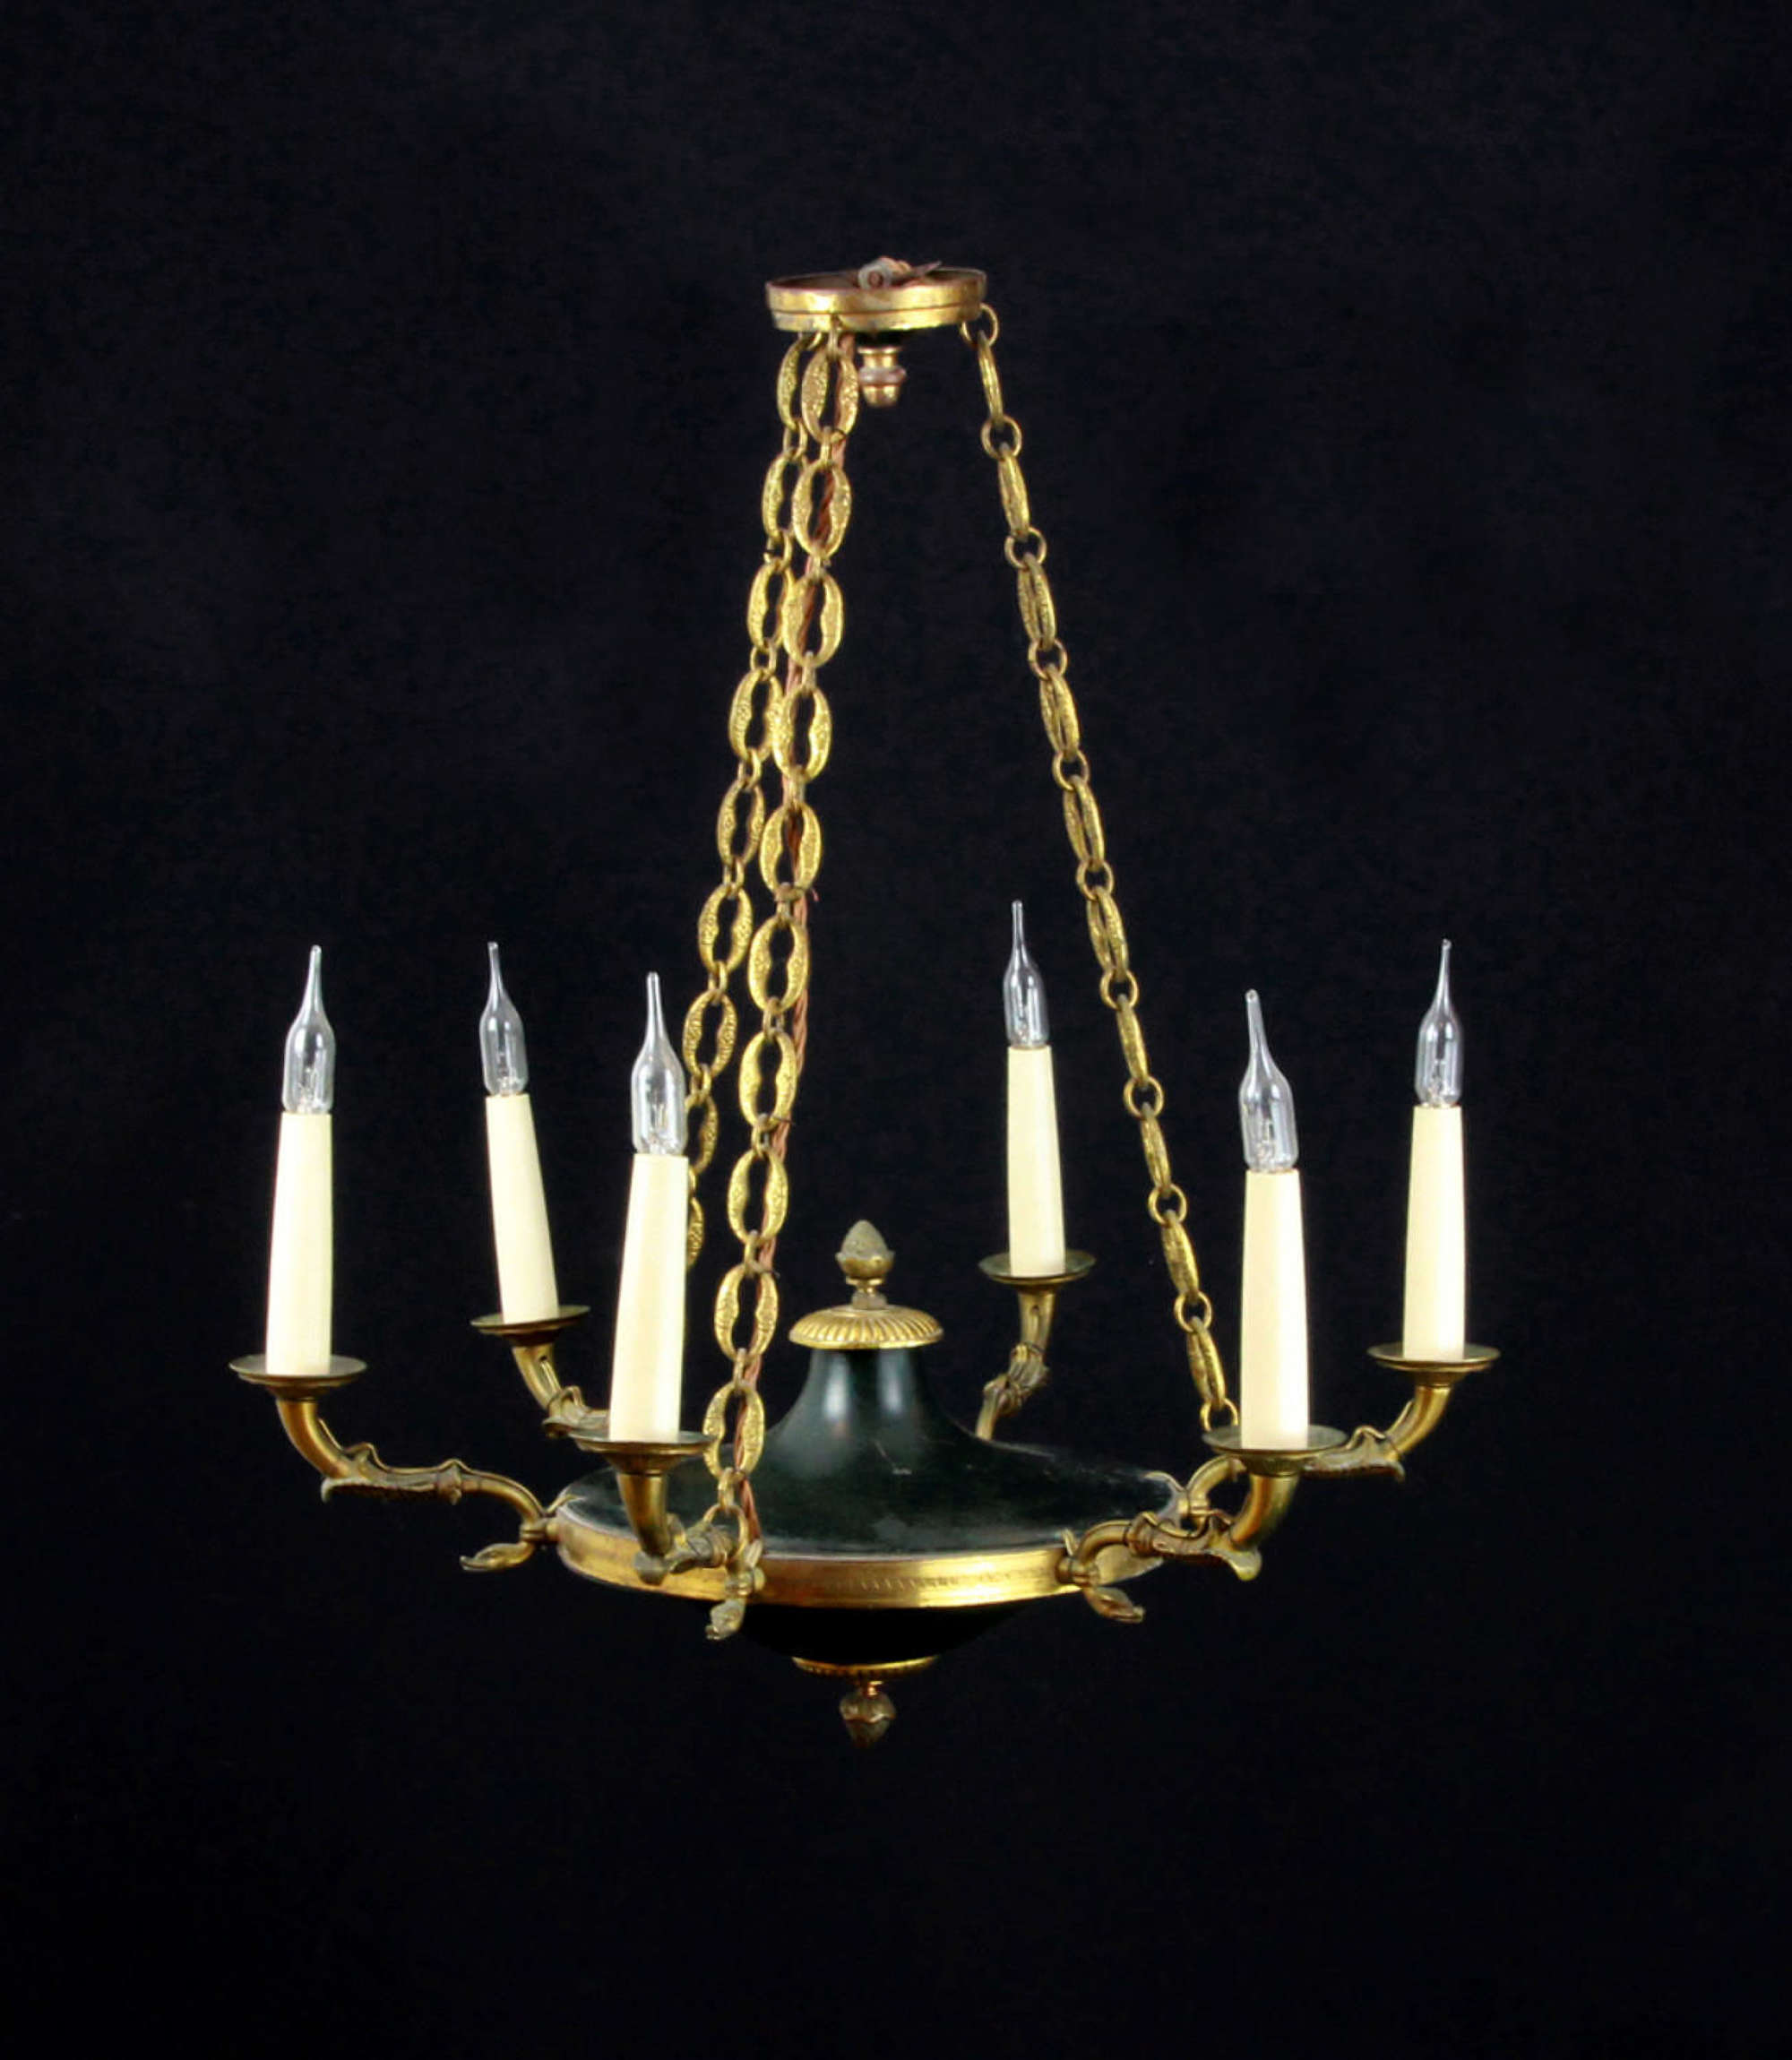 An Empire style chandelier